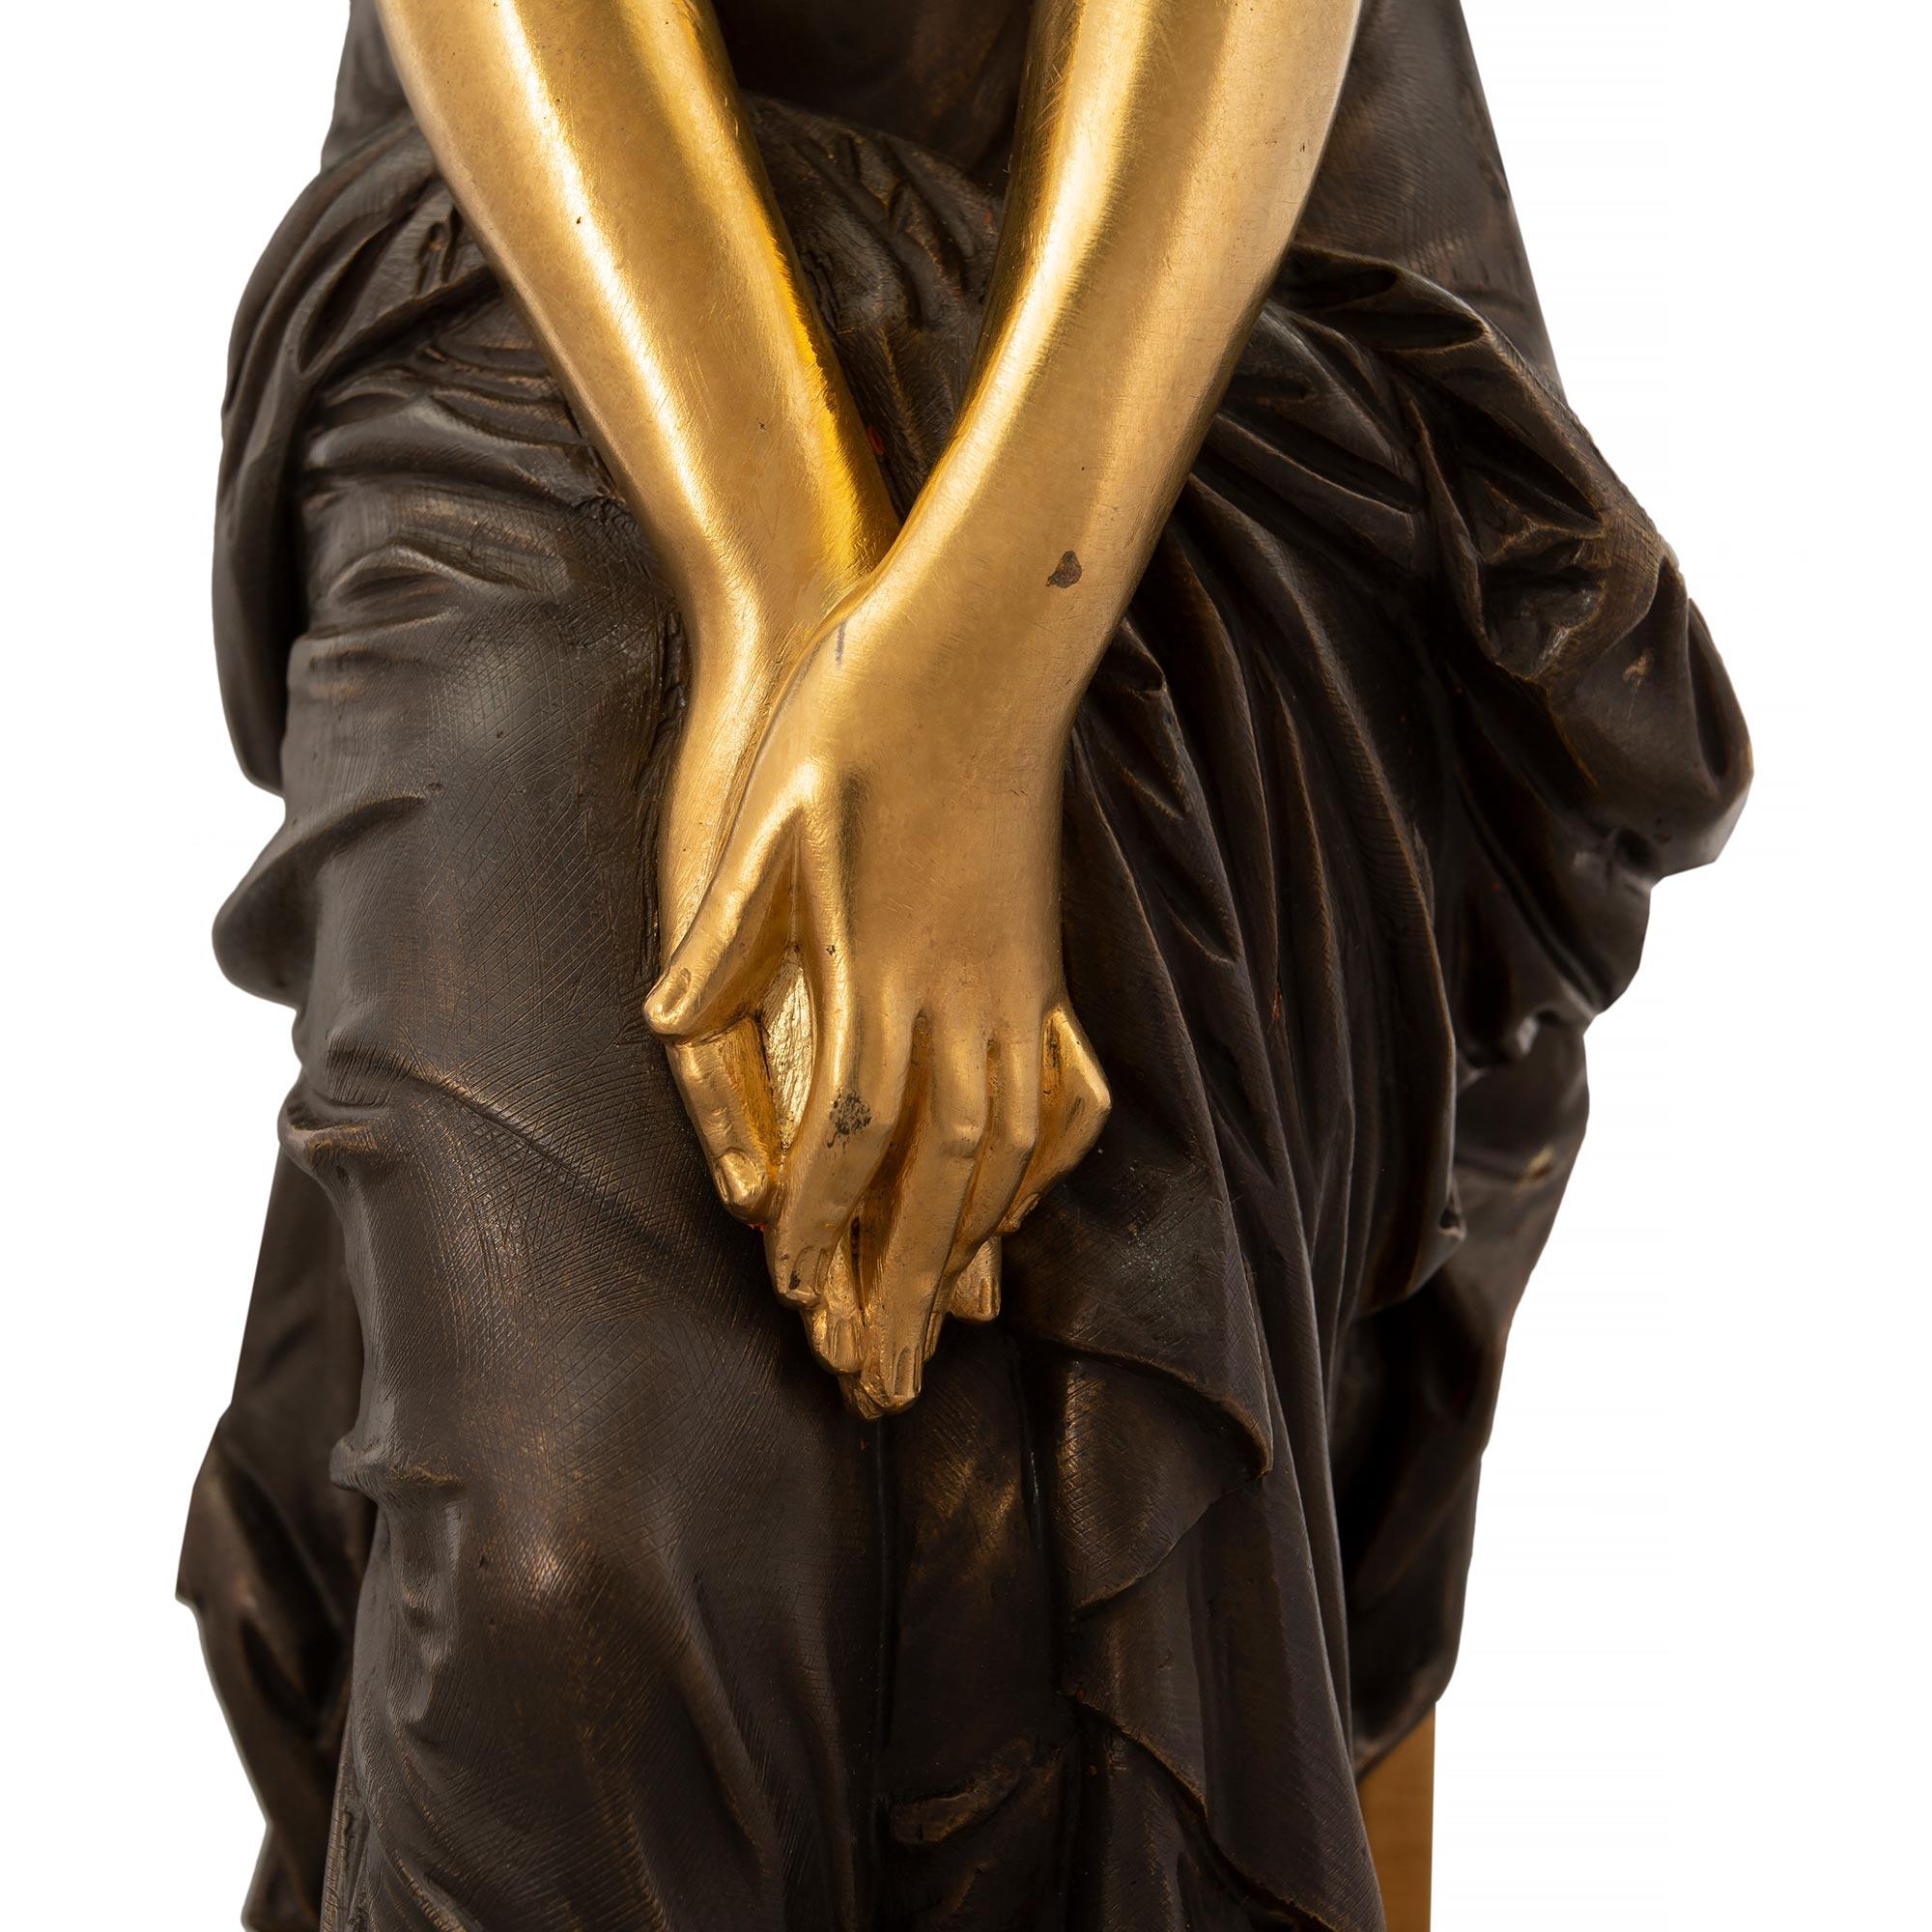 French Mid-19th Century Louis XVI Style Bronze and Ormolu Statue by Schoenwerck For Sale 6